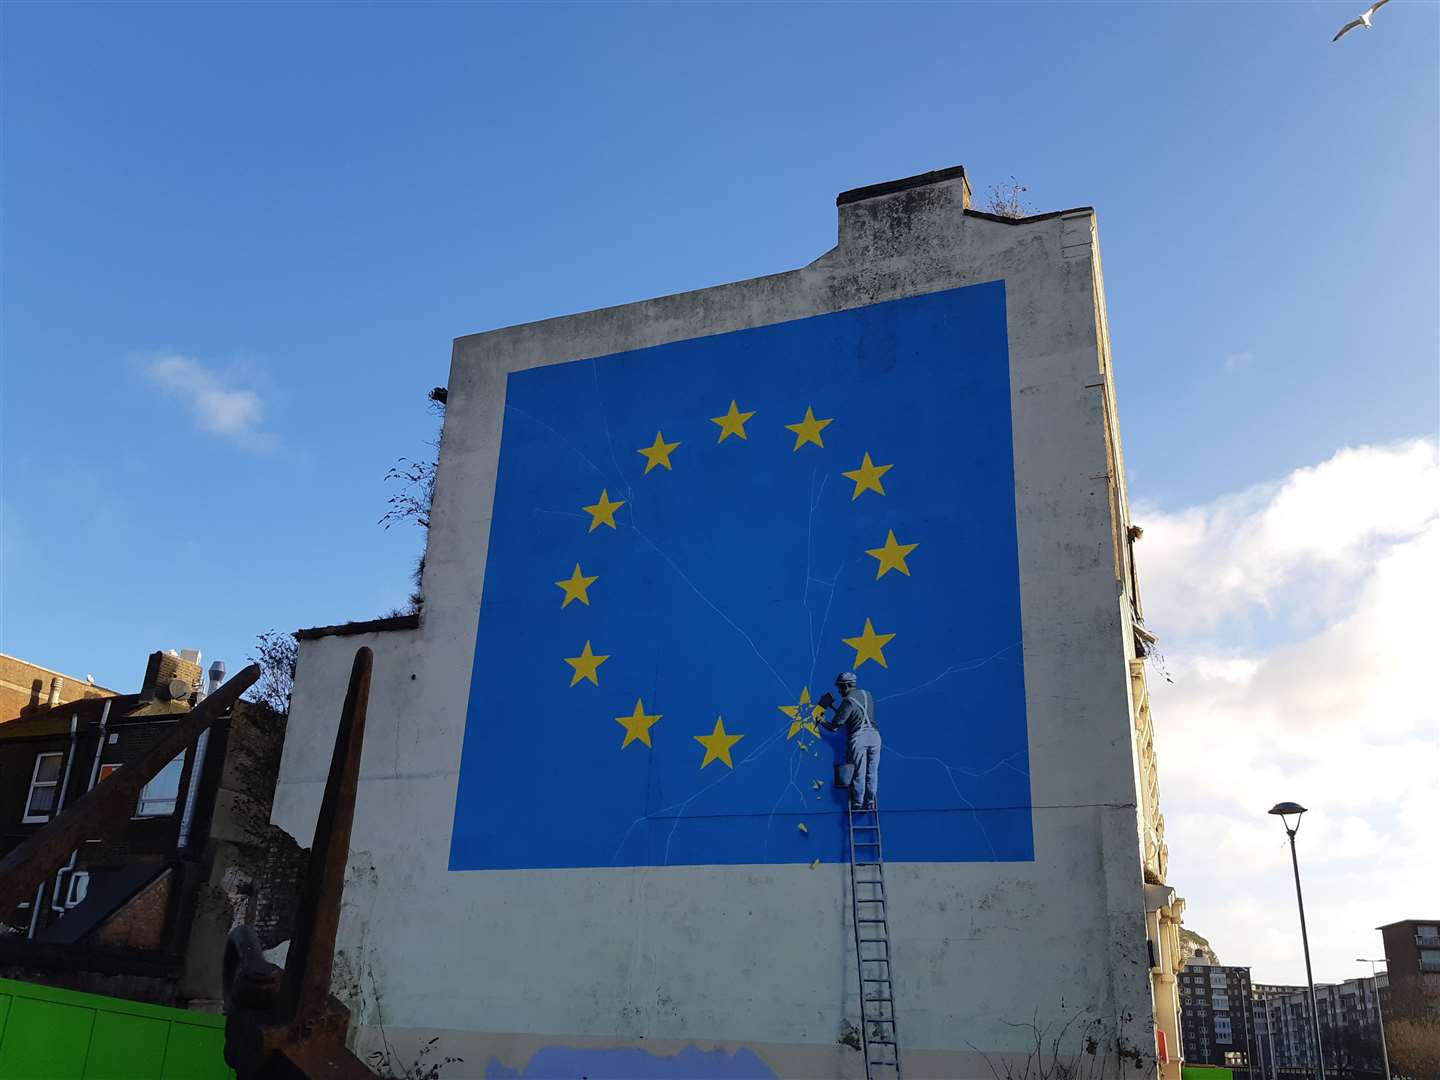 The Banksy Mural in Dover as it was when the mysterious artist completed the work